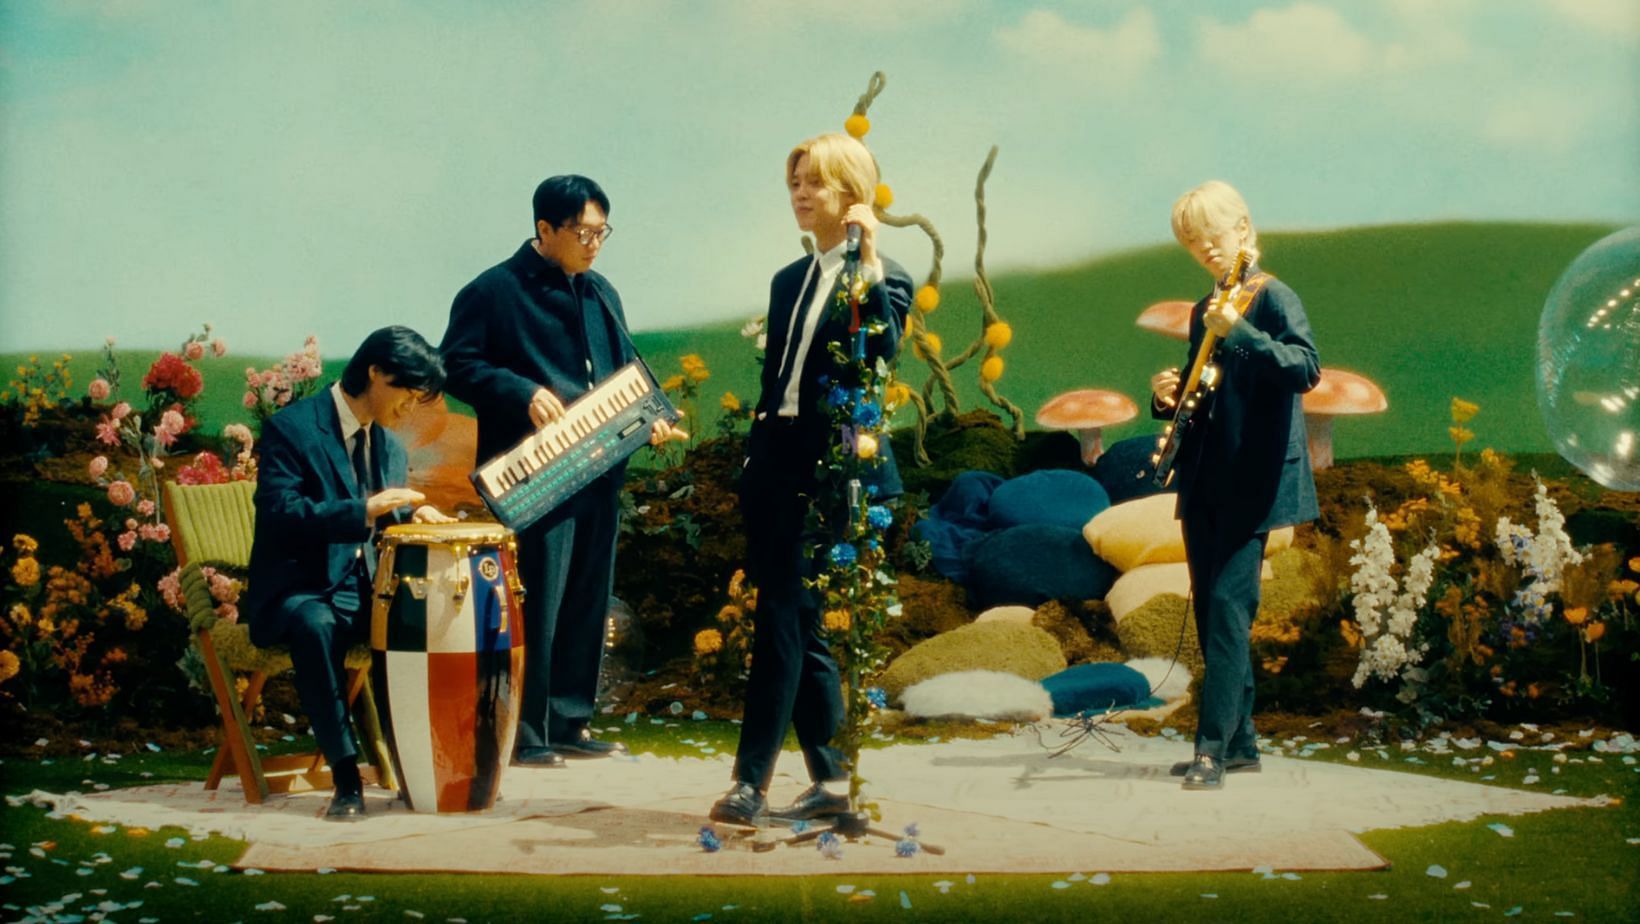 Pdogg, GHSTLOOP, and Evan&rsquo;s cameo debut in BTS Jimin&rsquo;s &ldquo;Smeraldo Garden Marching Band&rdquo; MV. (Image via YouTube/HYBE LABELS)